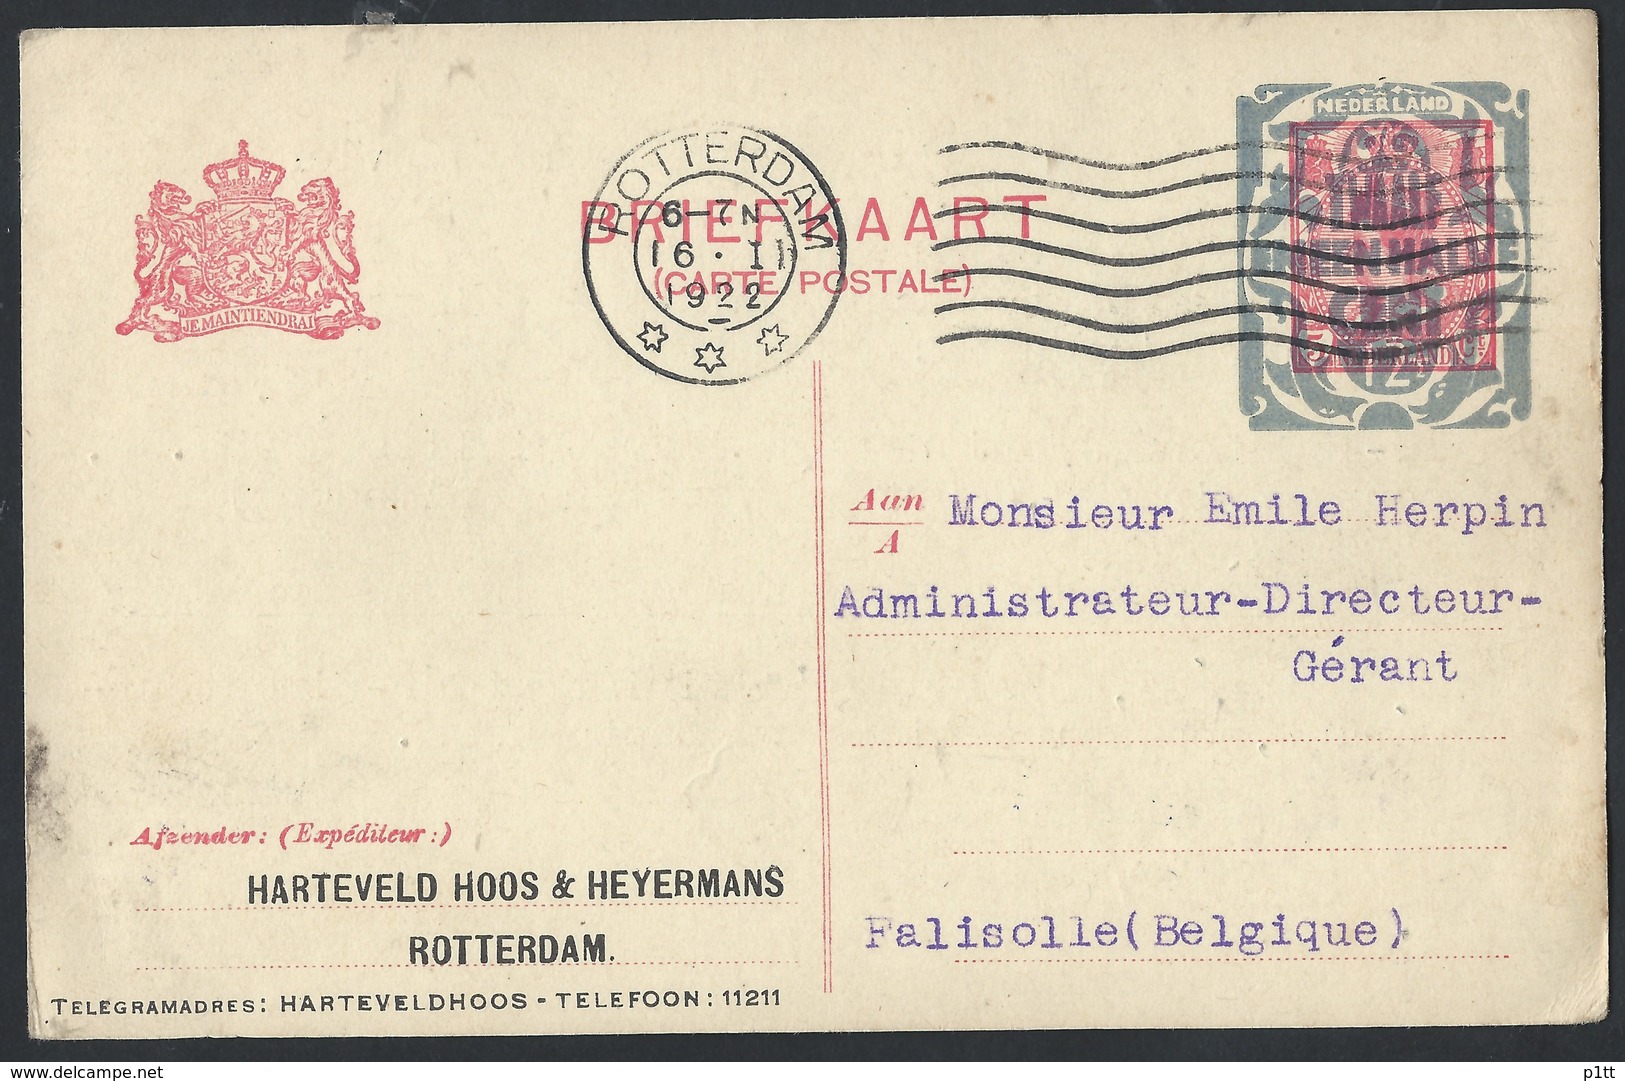 8n.Postcard. The Mail Was Circulated In 1922 Rotterdam (Netherlands) Falisolle (Belgium). Overprints Of Revaluation. - Covers & Documents